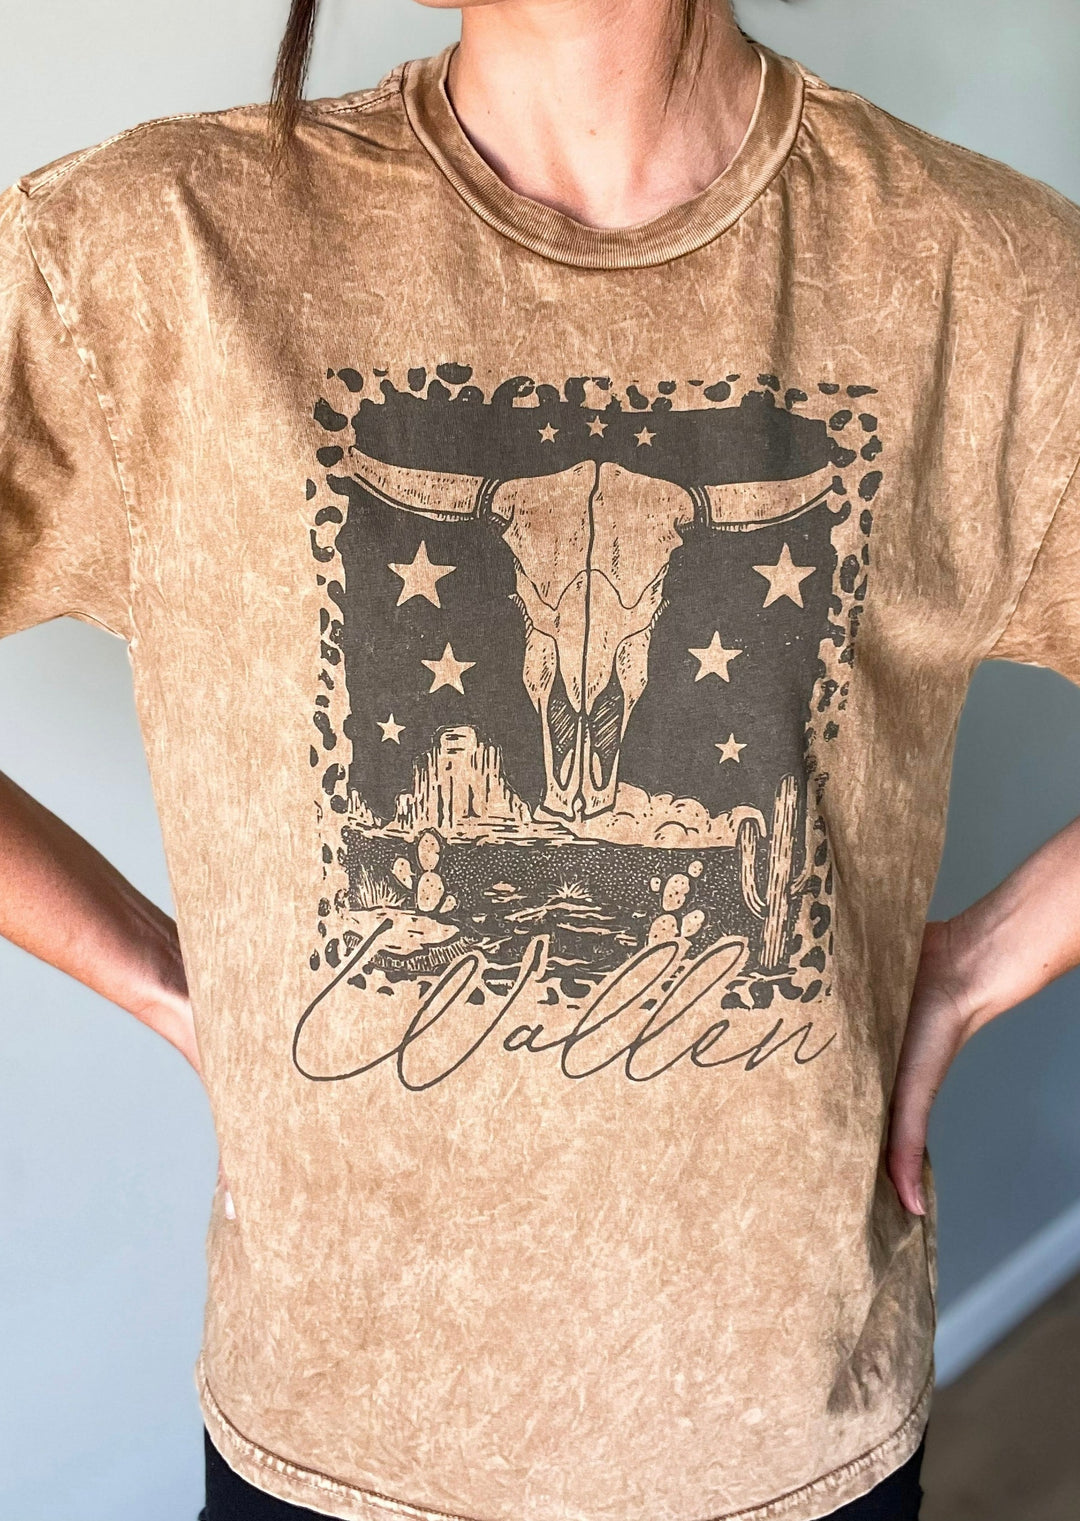 Graphic Tee for Country Concert | Wallen Tee | Country Western Graphic Tees